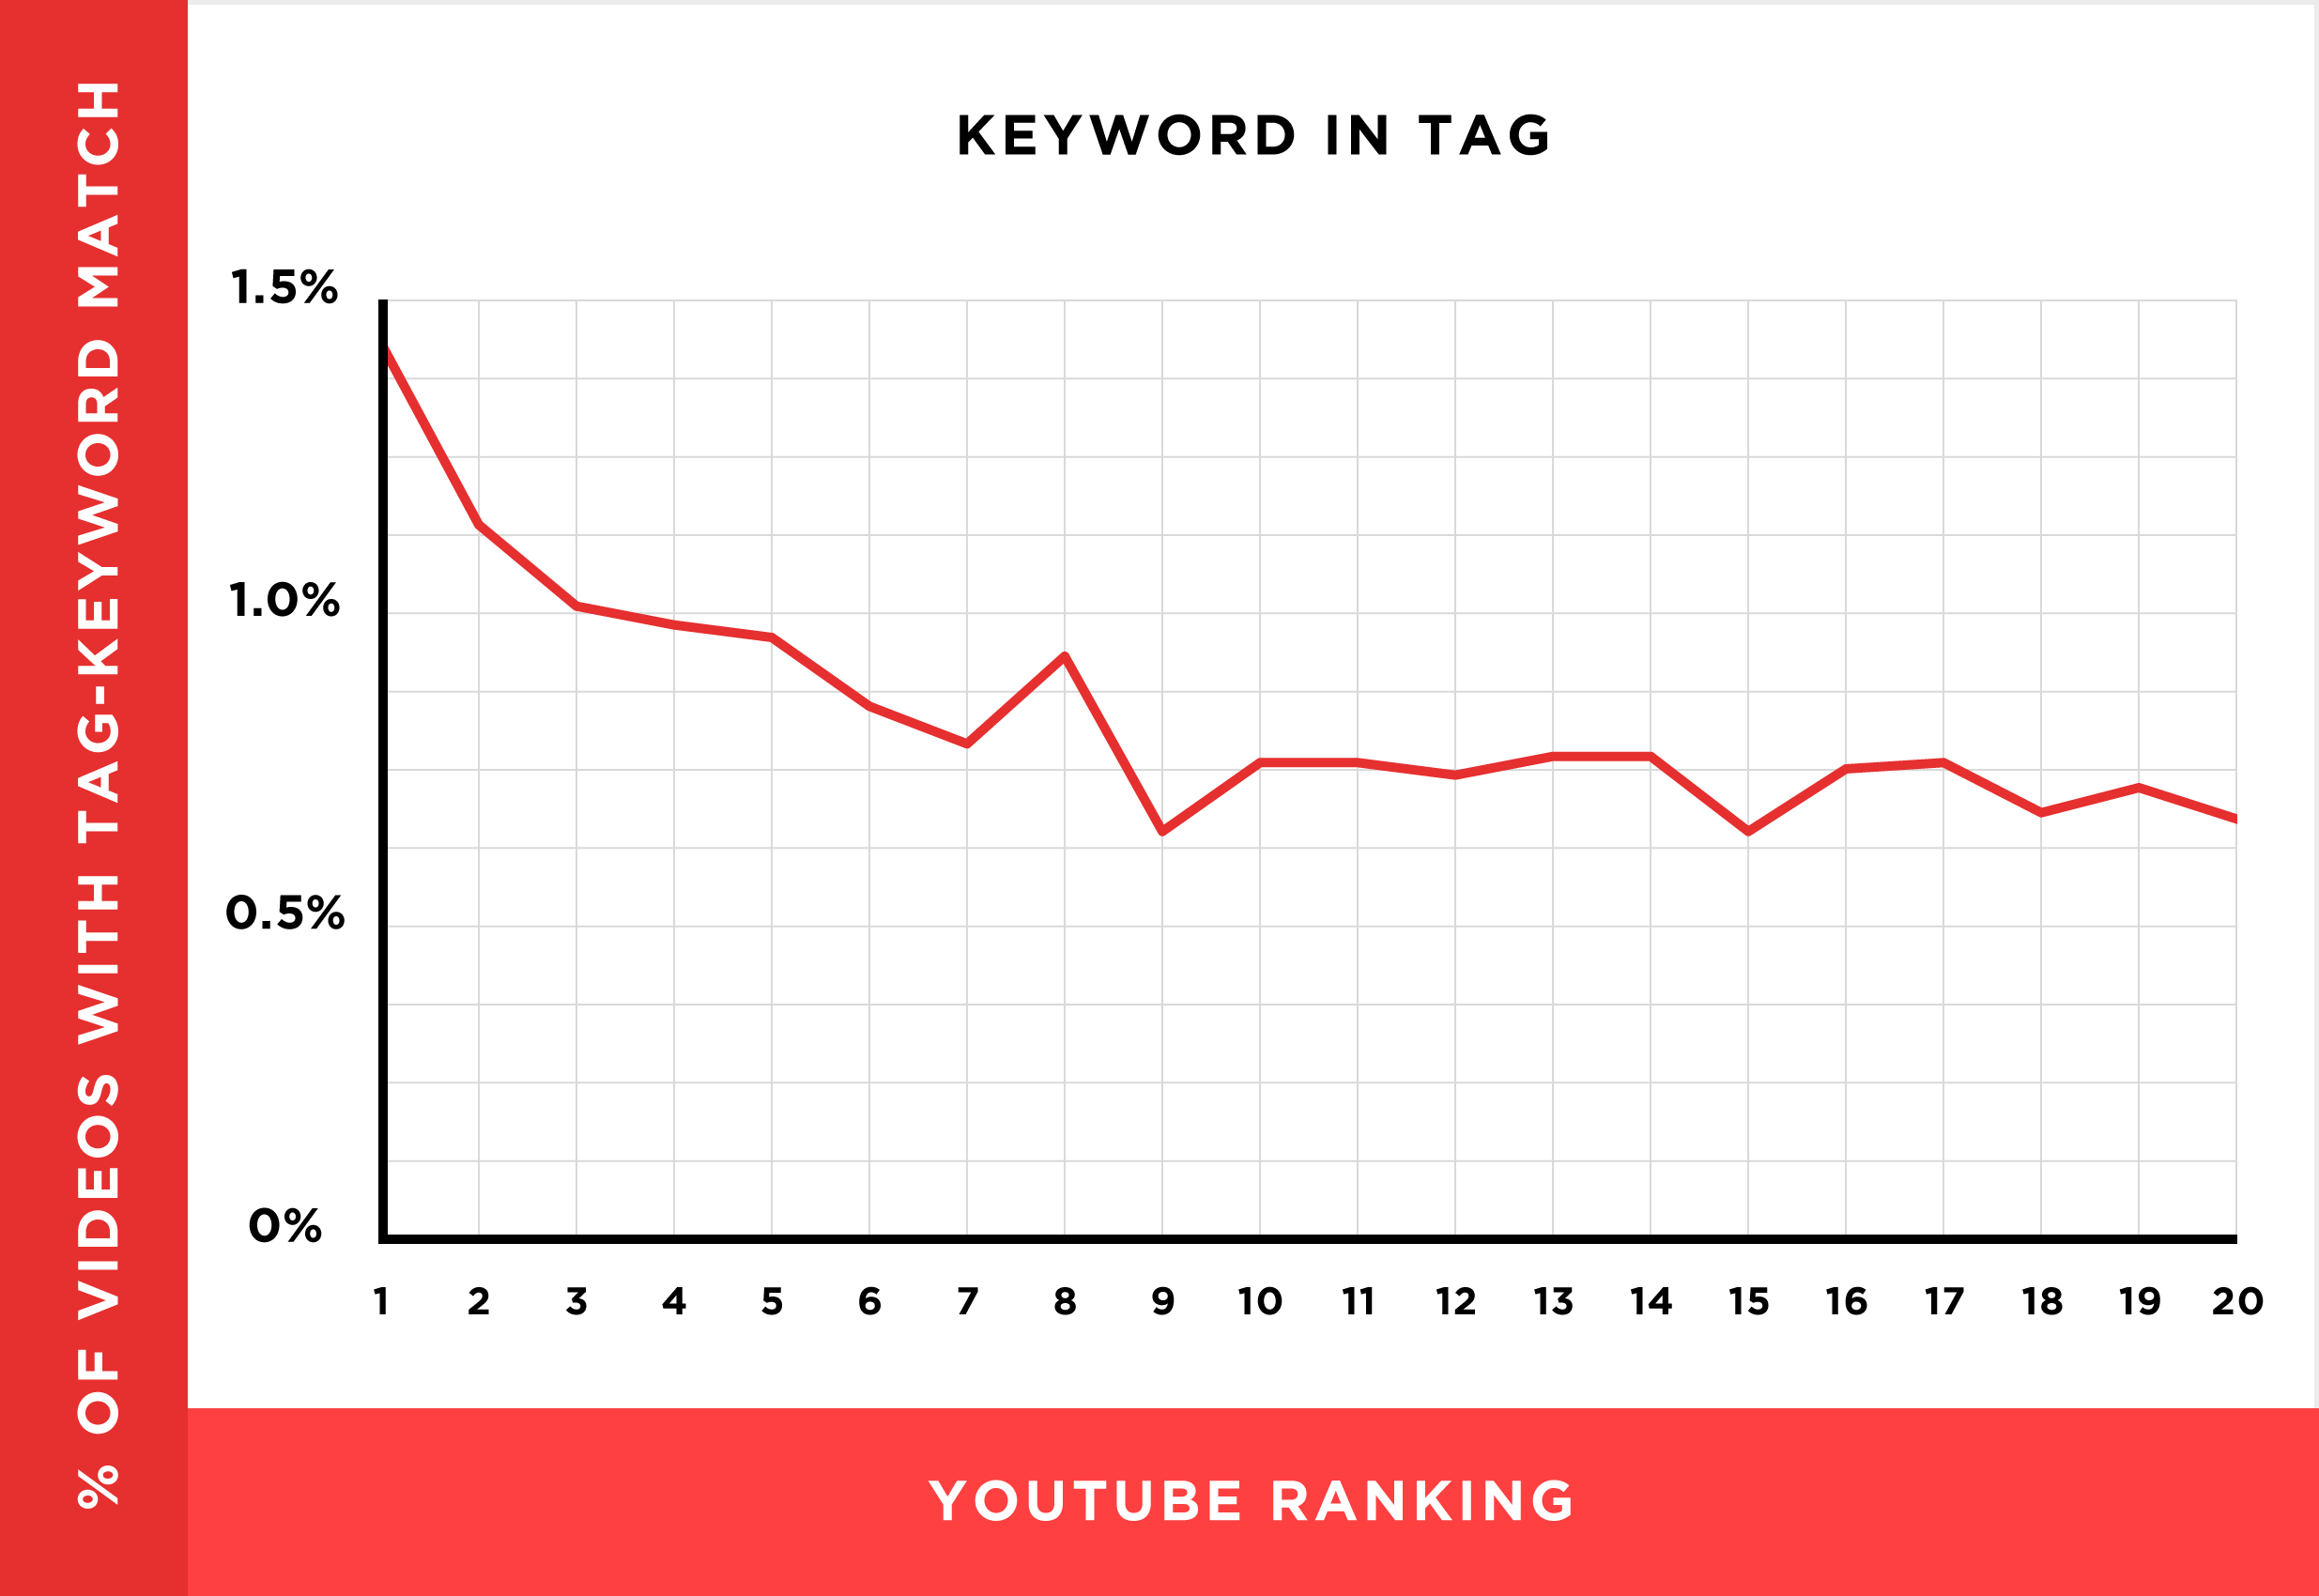 the relationship between tags and YouTube rankings